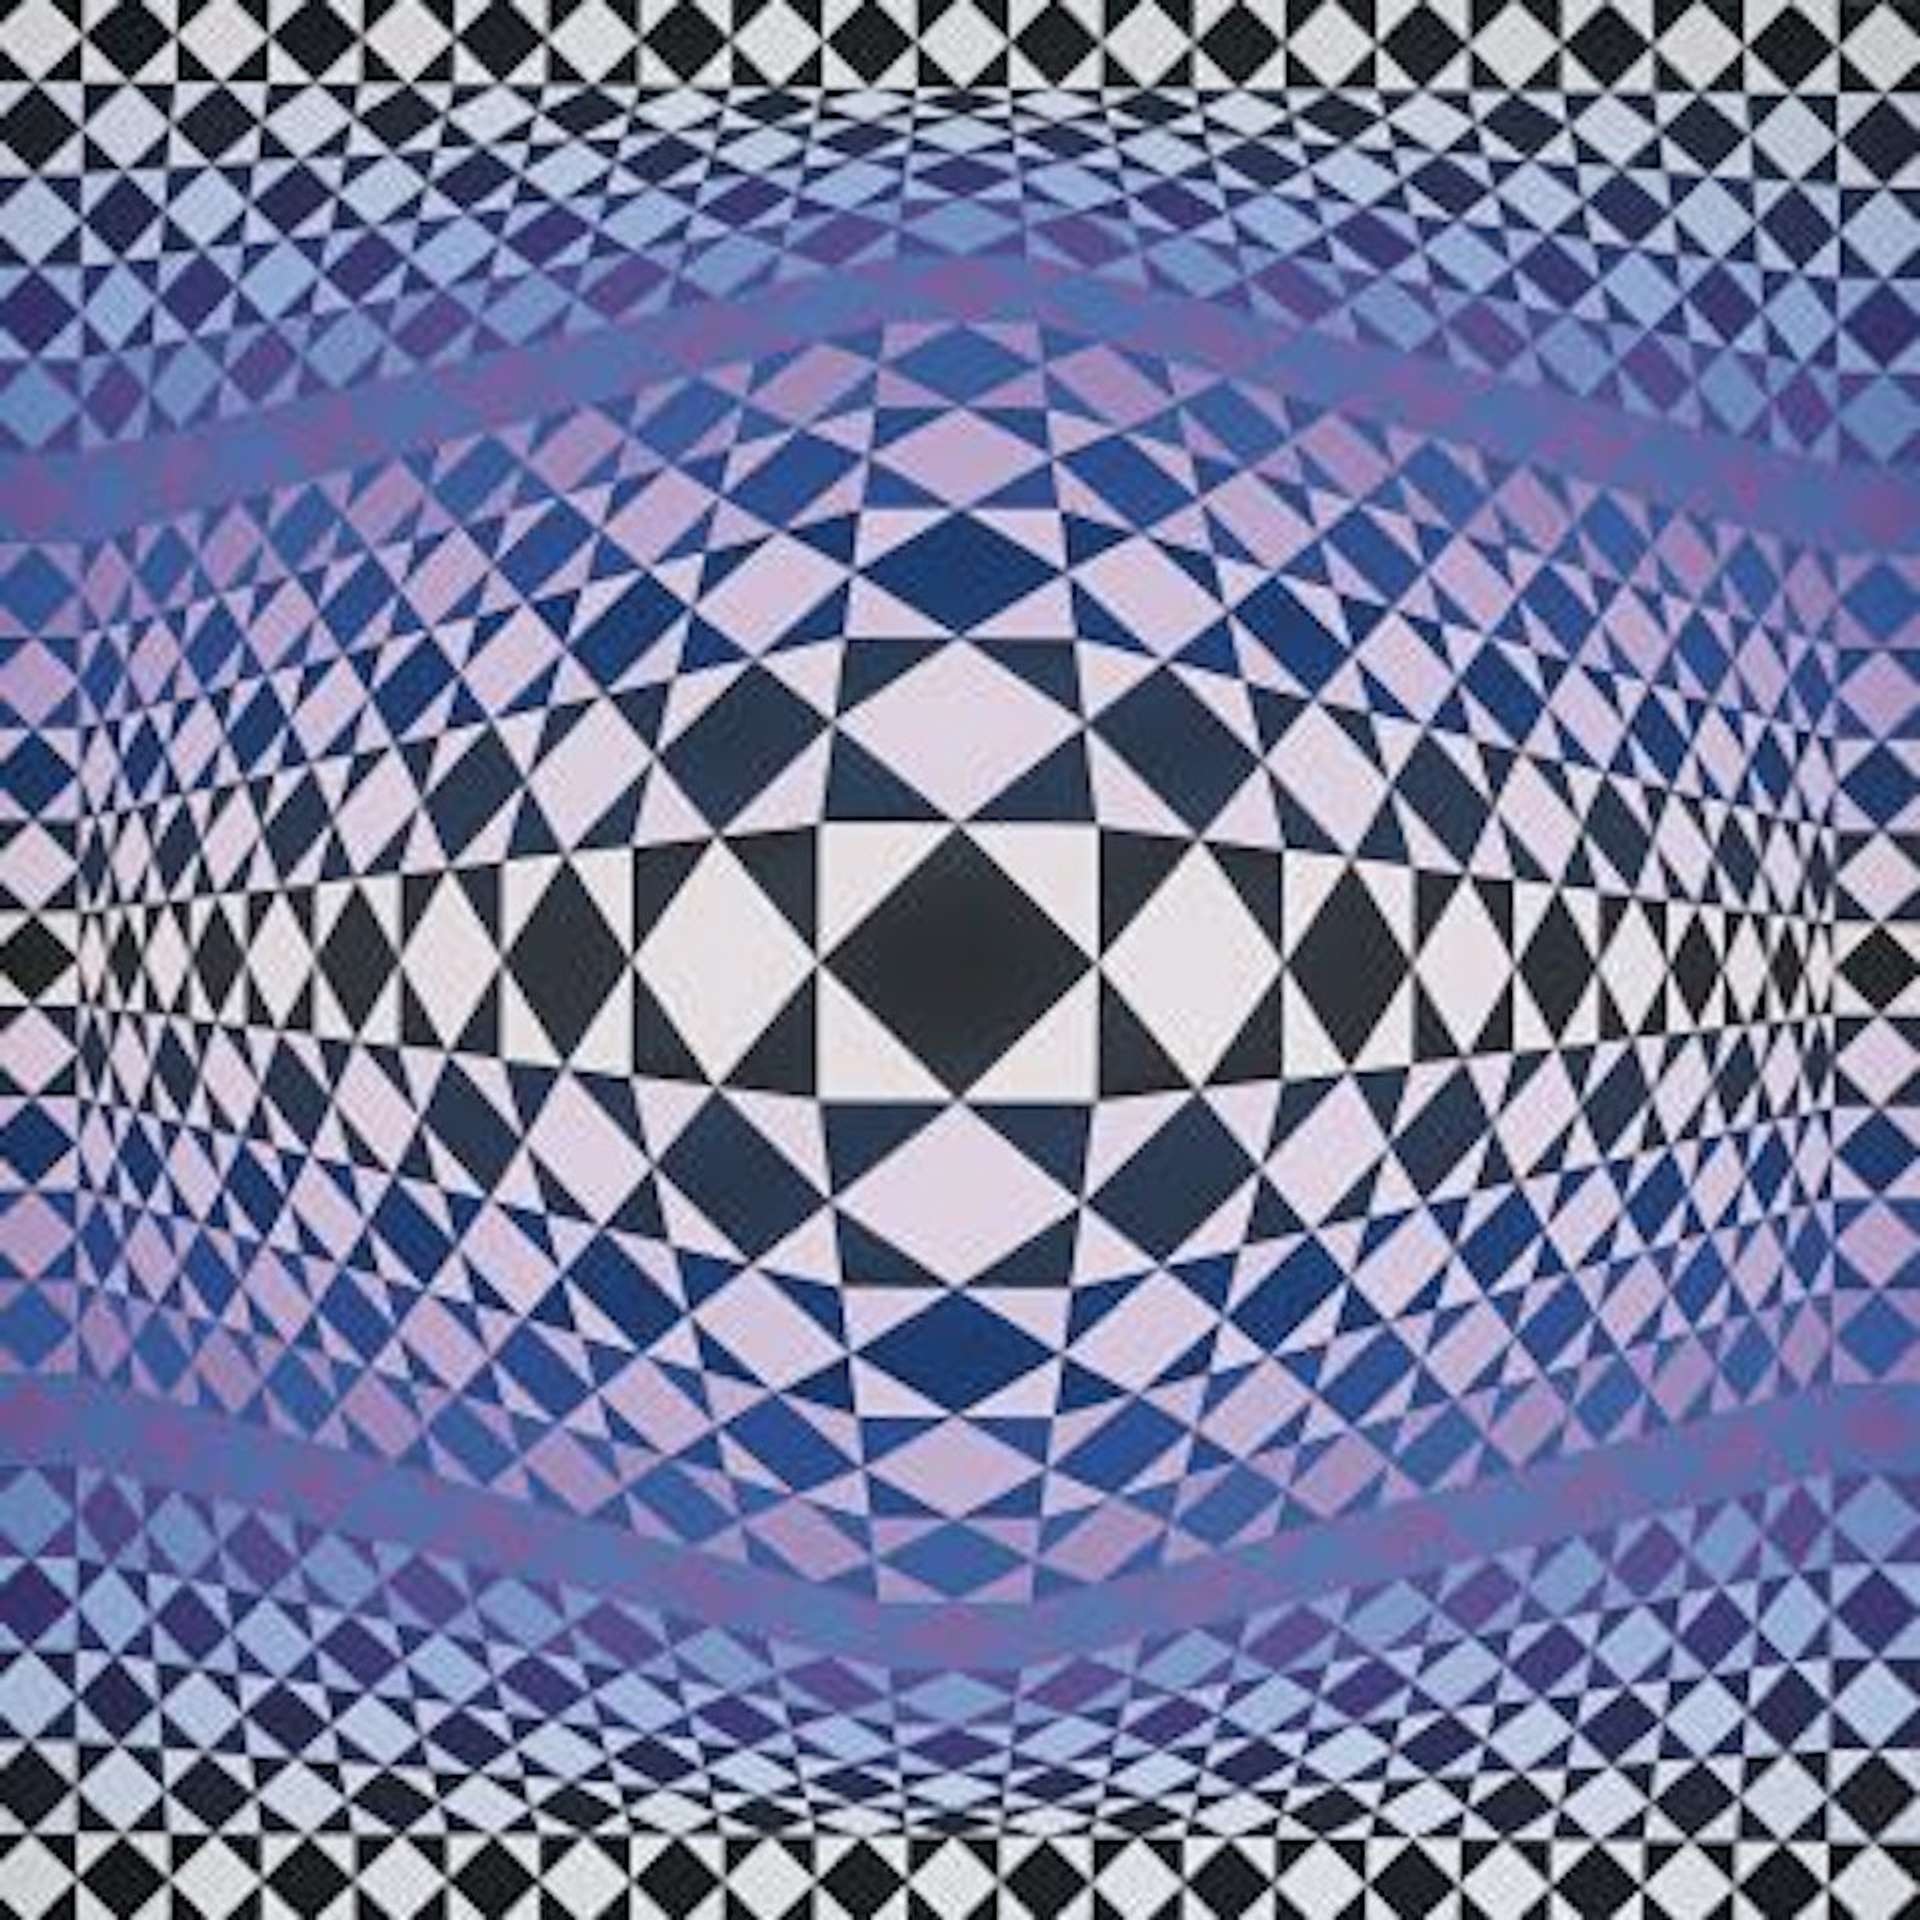 A composition of white, grey, blues, and purple hues forming a patterned optical effect. Rhombuses are carefully positioned within squares, creating a captivating visual arrangement.